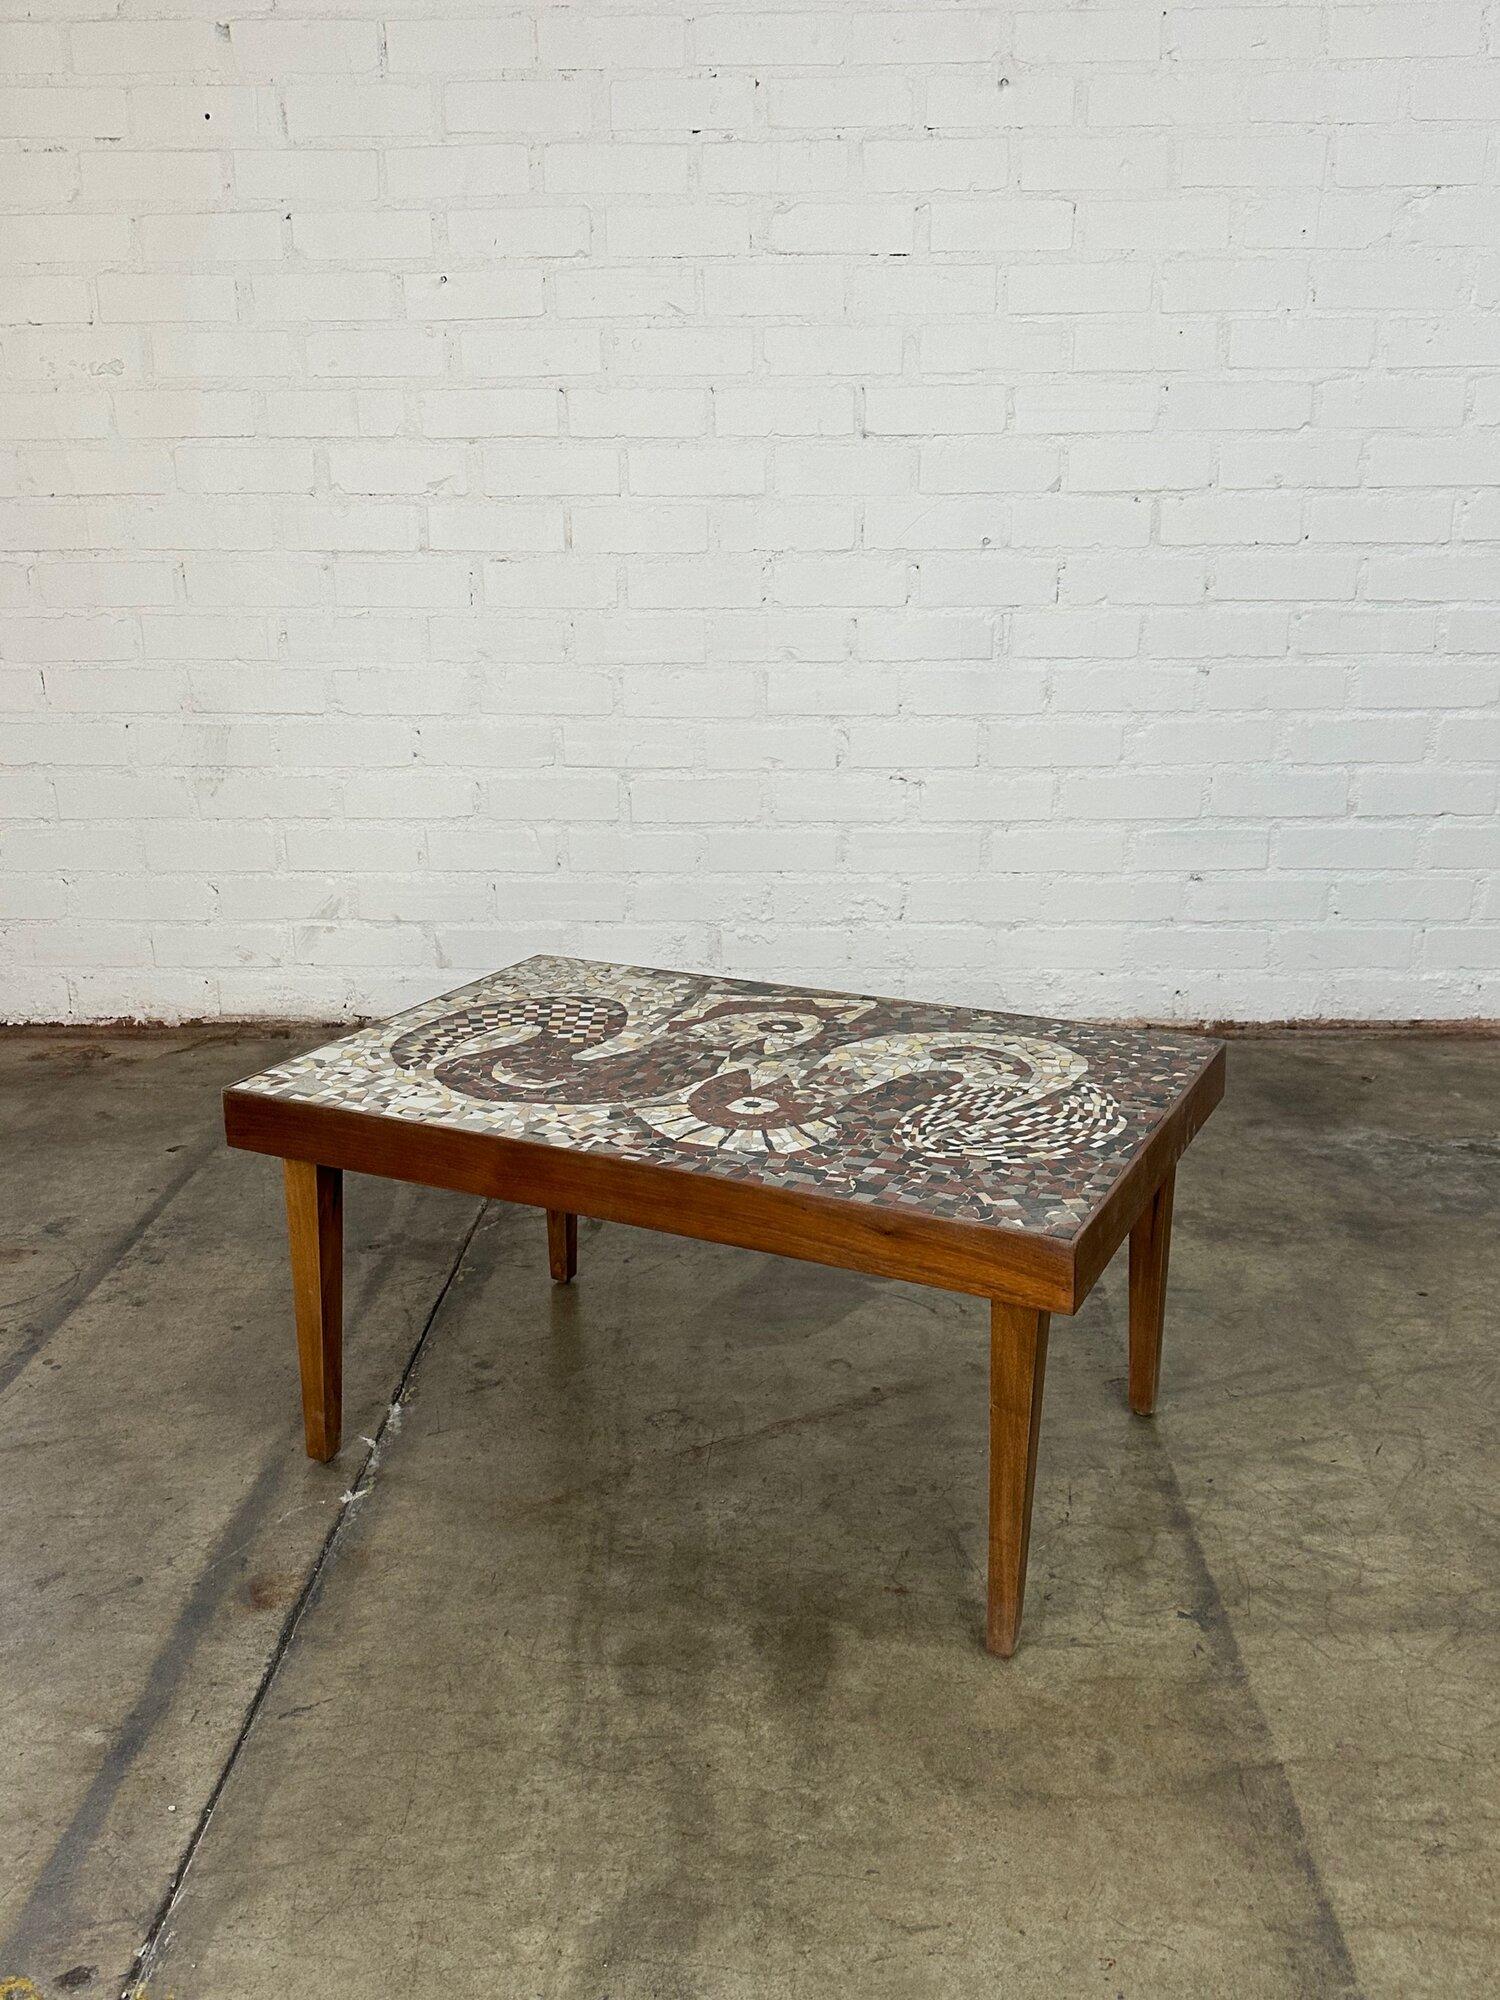 W36.5 D24.5 H17.5

Fully restored mosaic coffee table in structurally sound and sturdy condition. Coffee table shows well and has no major areas of wear. 